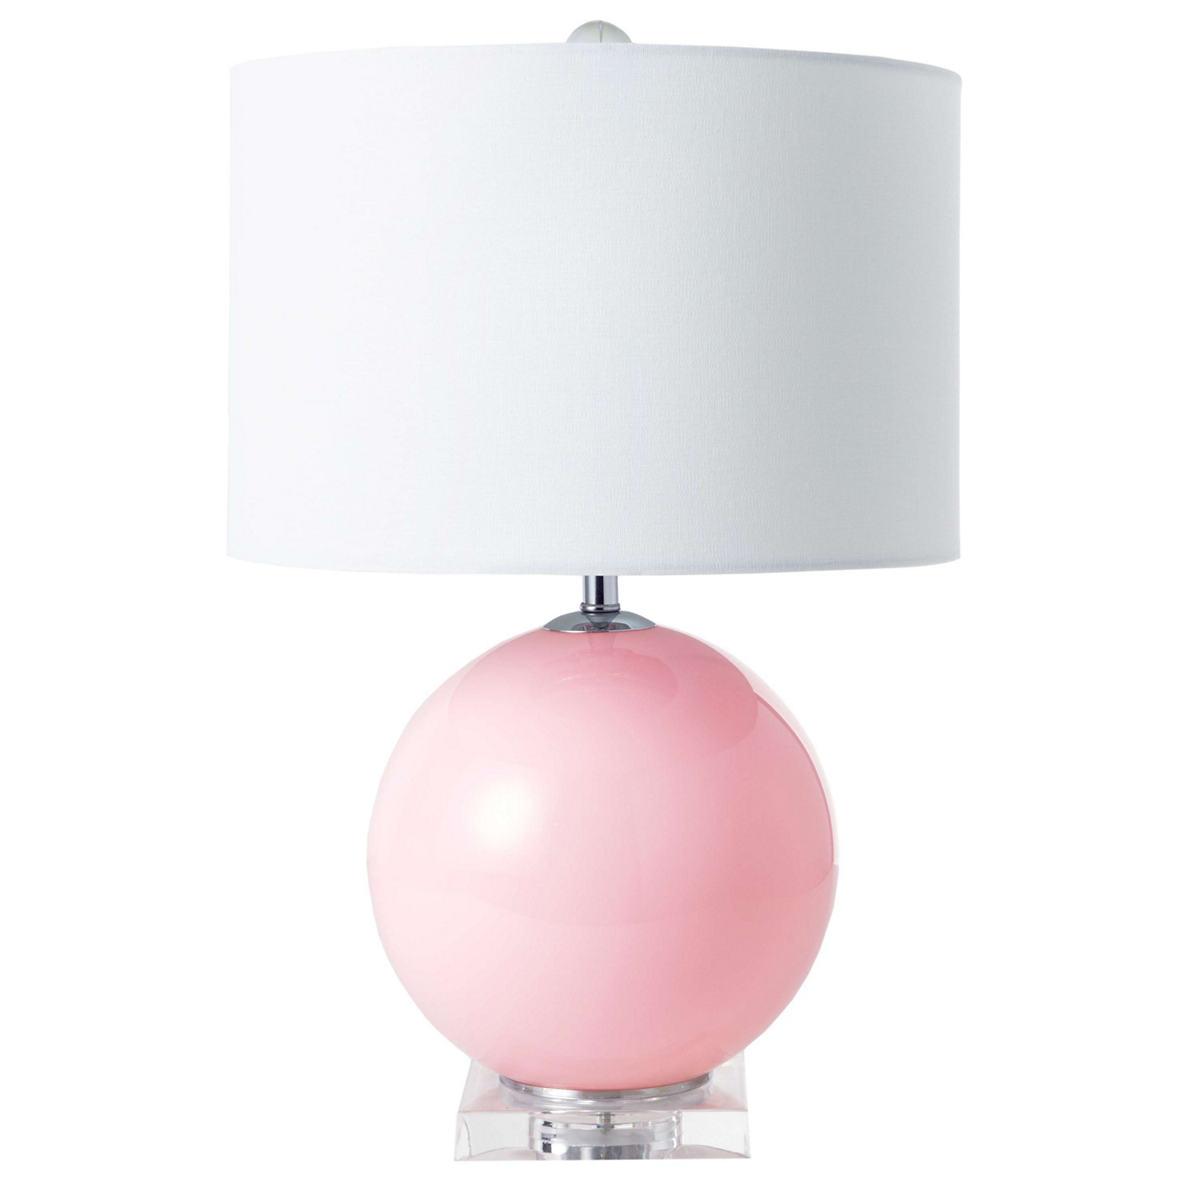 On The Ball Pink Table Lamp Furniture, Blush Pink Desk Light